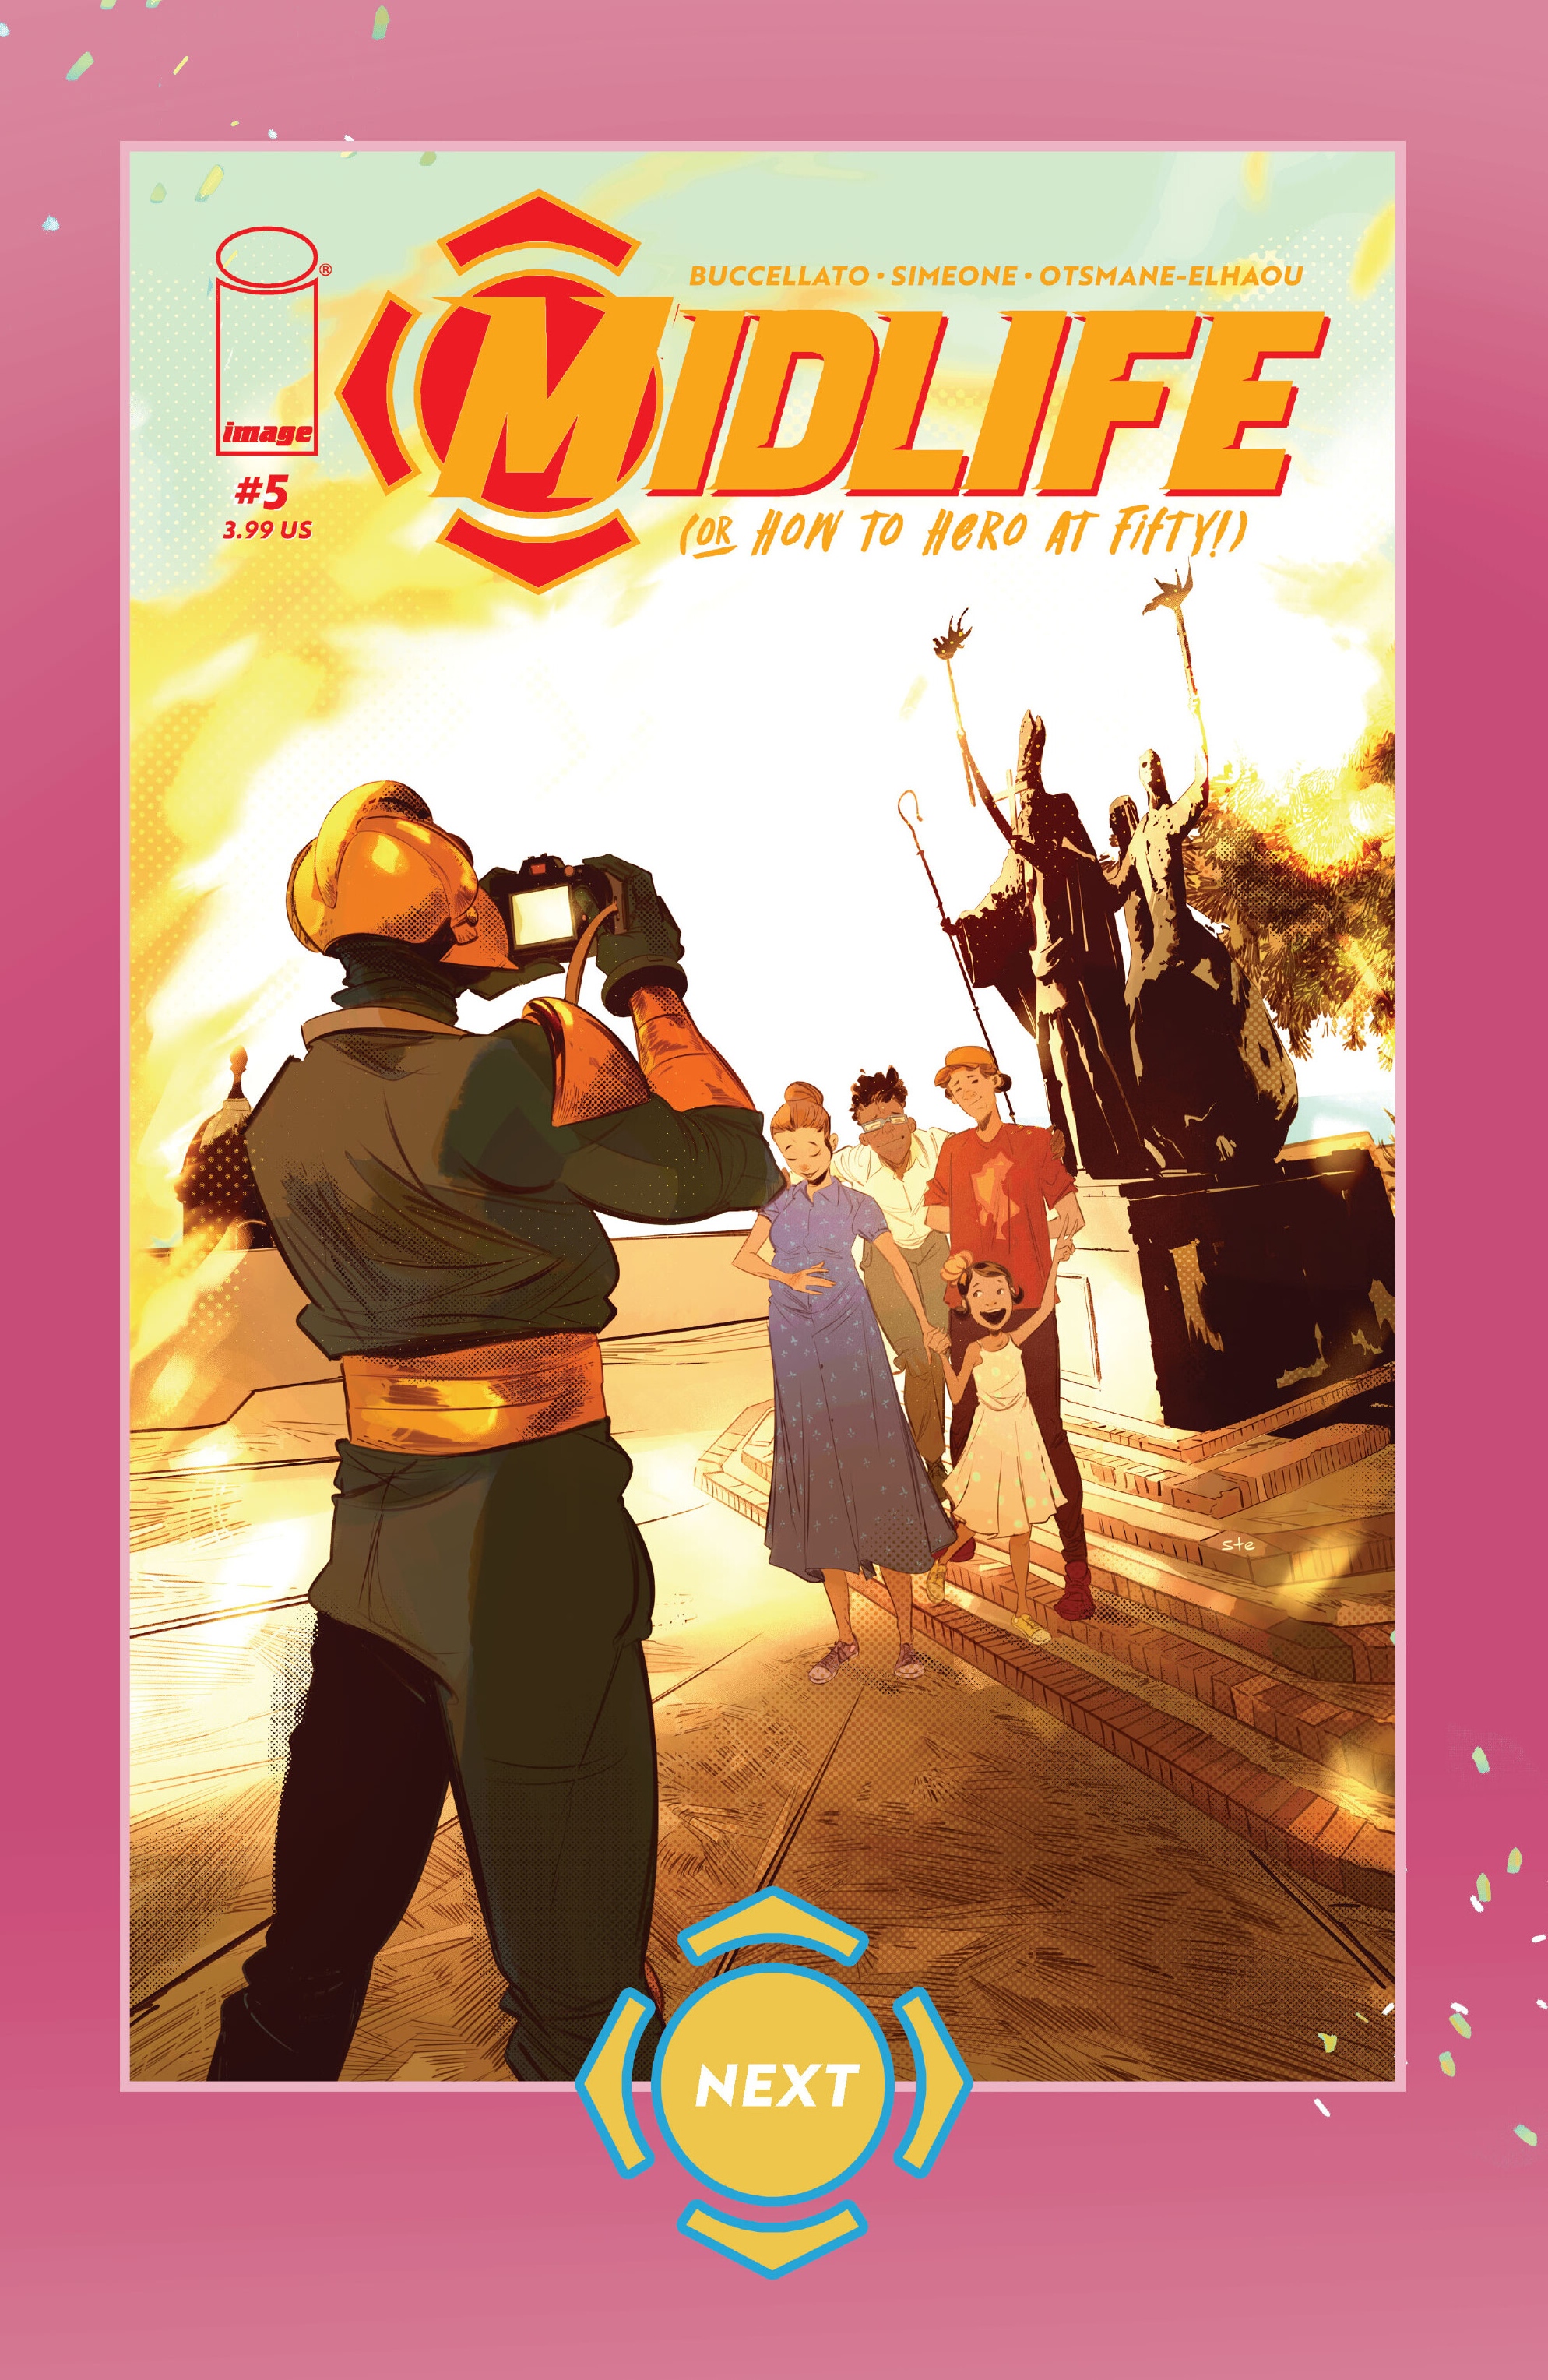 Read online Midlife (or How to Hero at Fifty!) comic -  Issue #4 - 30